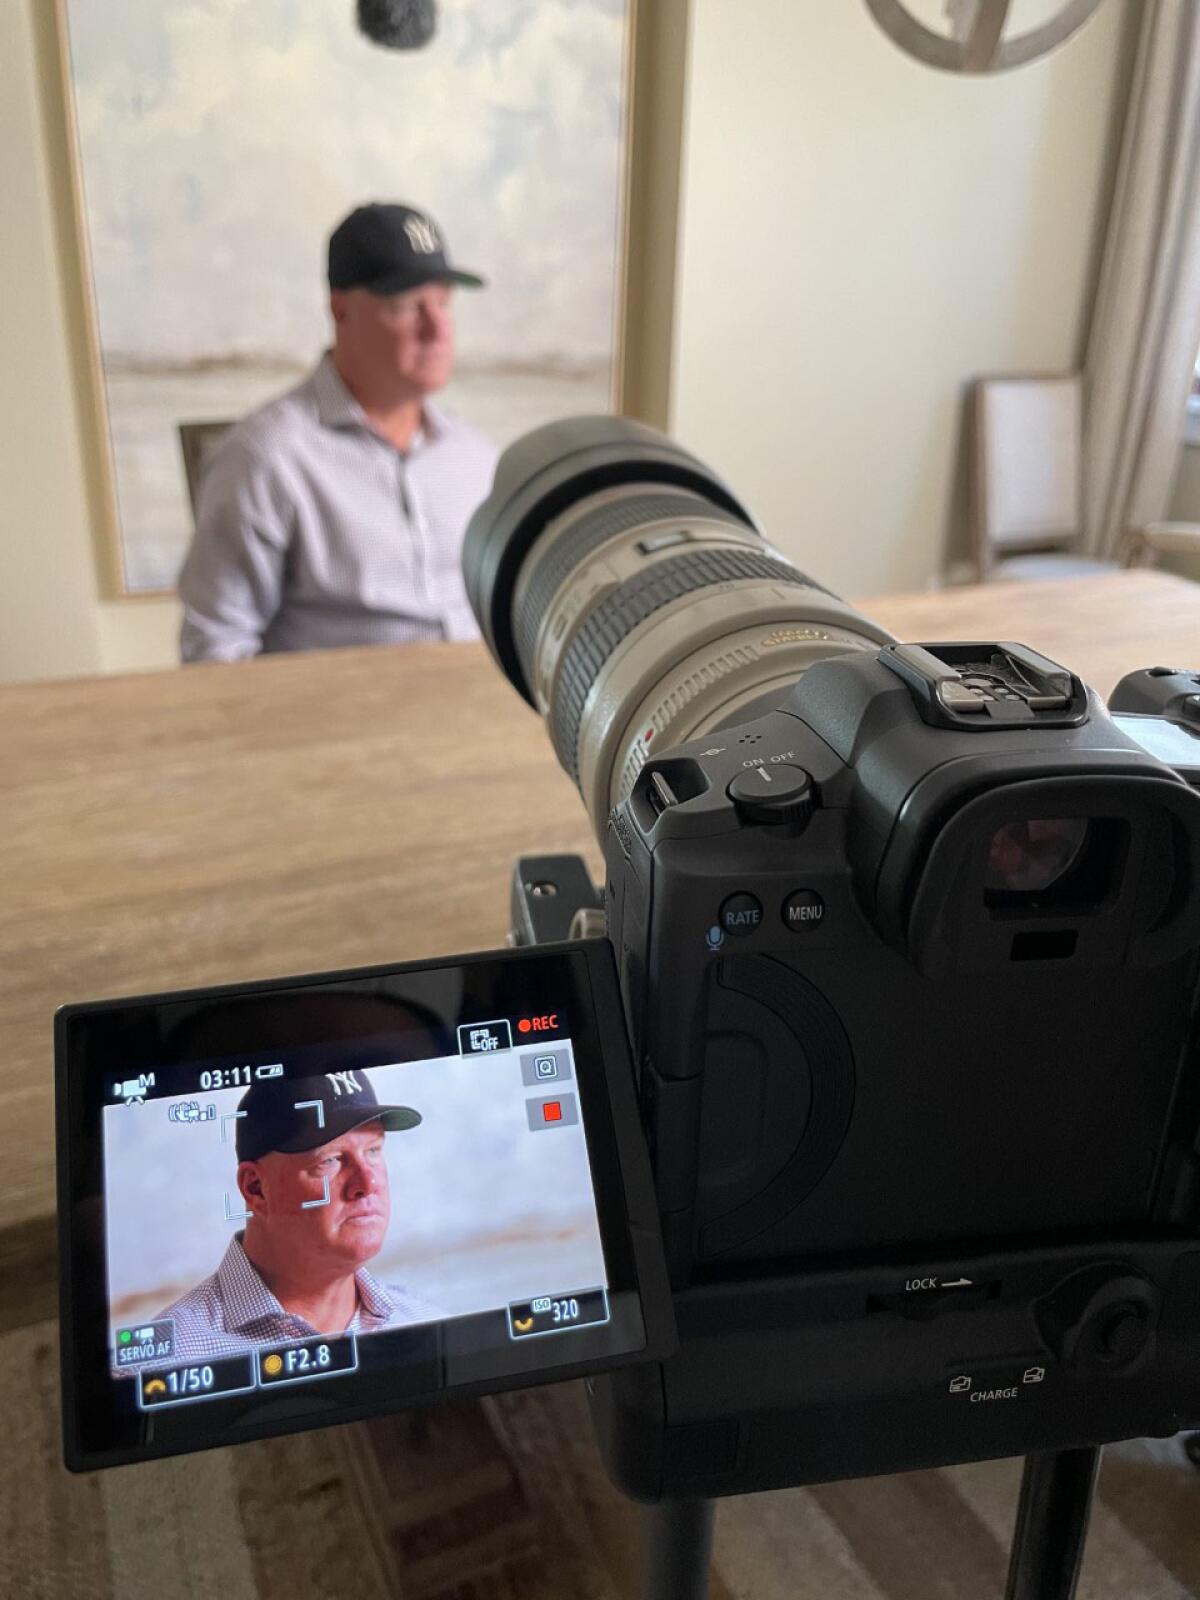 Newport Beach resident Jim Abbott, who threw a no-hitter with the Yankees in 1993, was interviewed for the documentary.